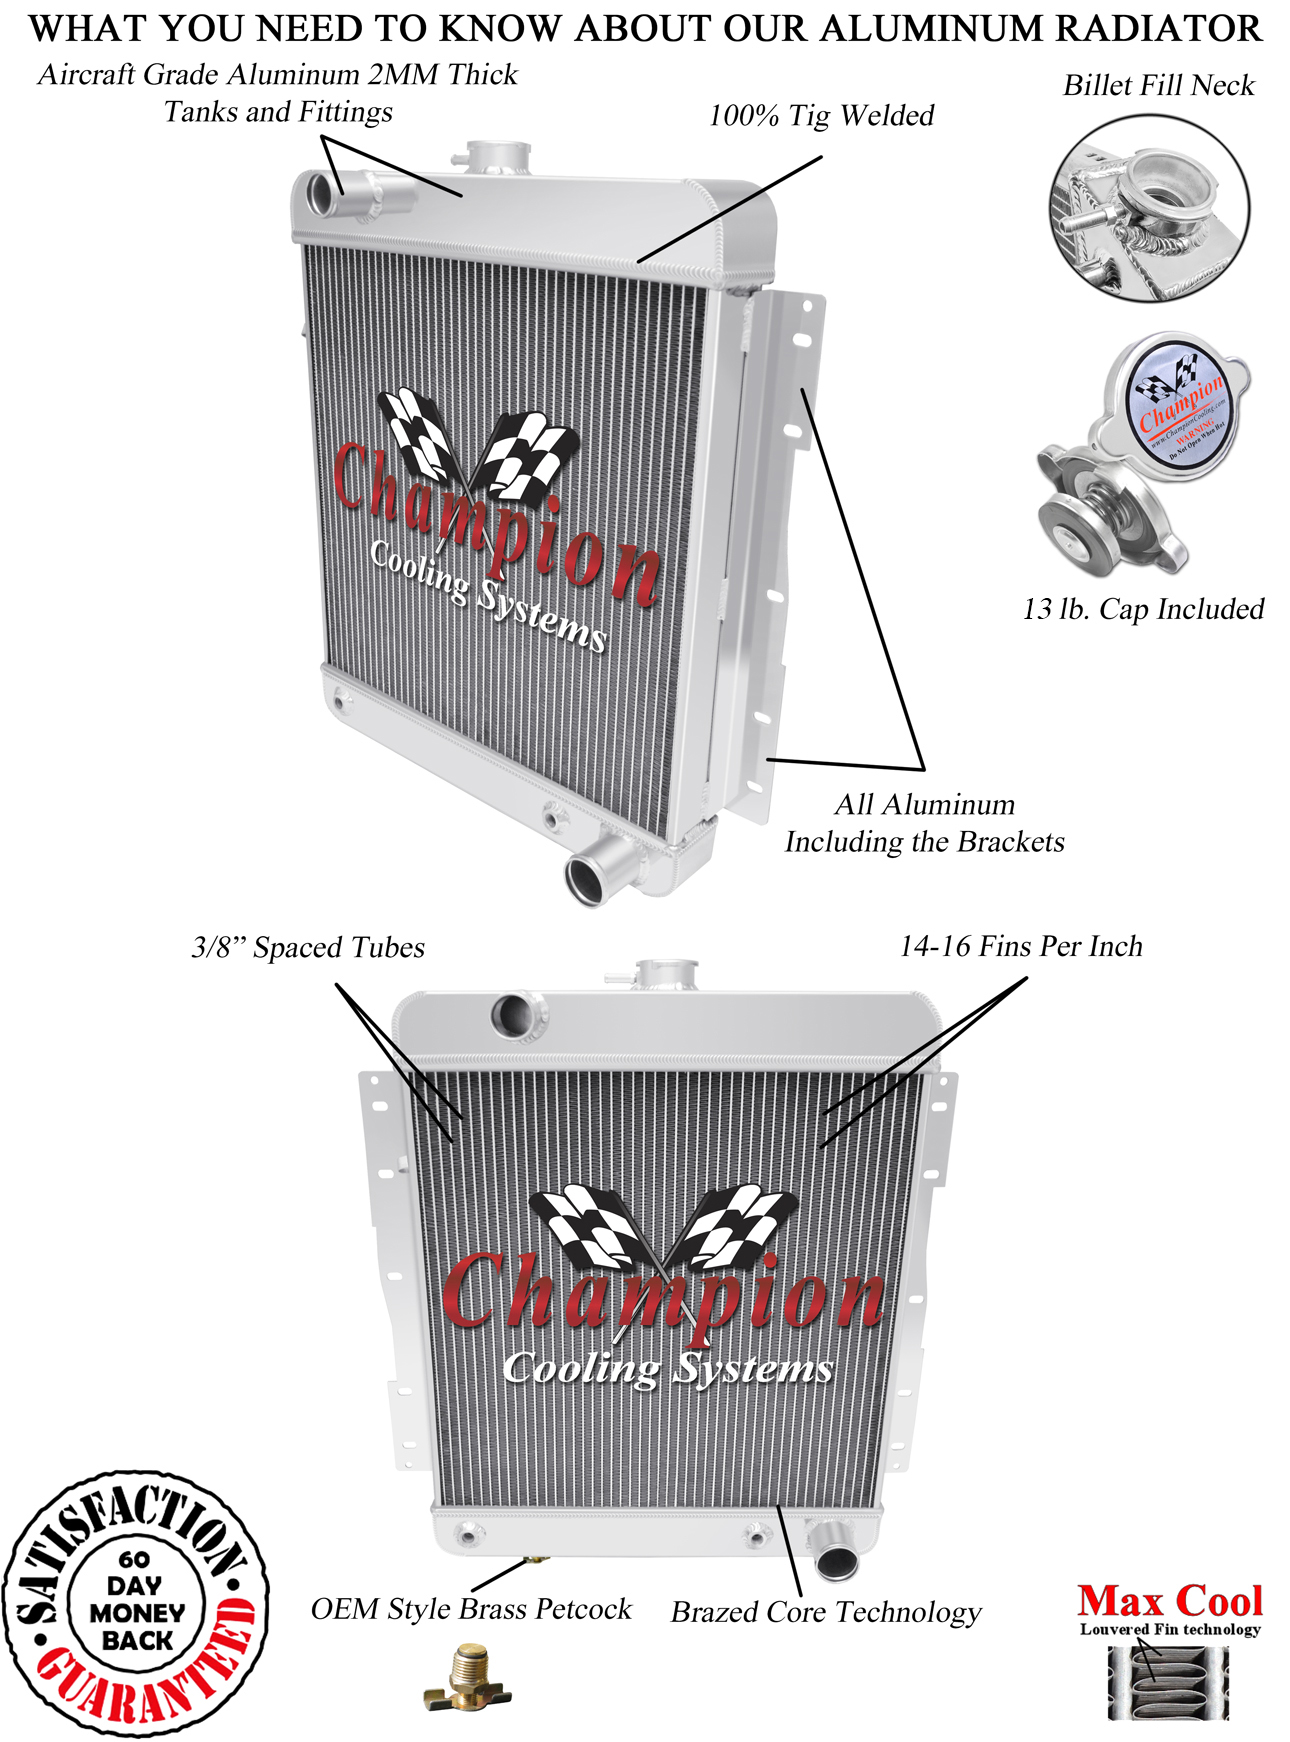 https://www.championcooling.com/photos/Photos%20White/With%20Fans/Combos/1661/1661_a_d_w.jpg